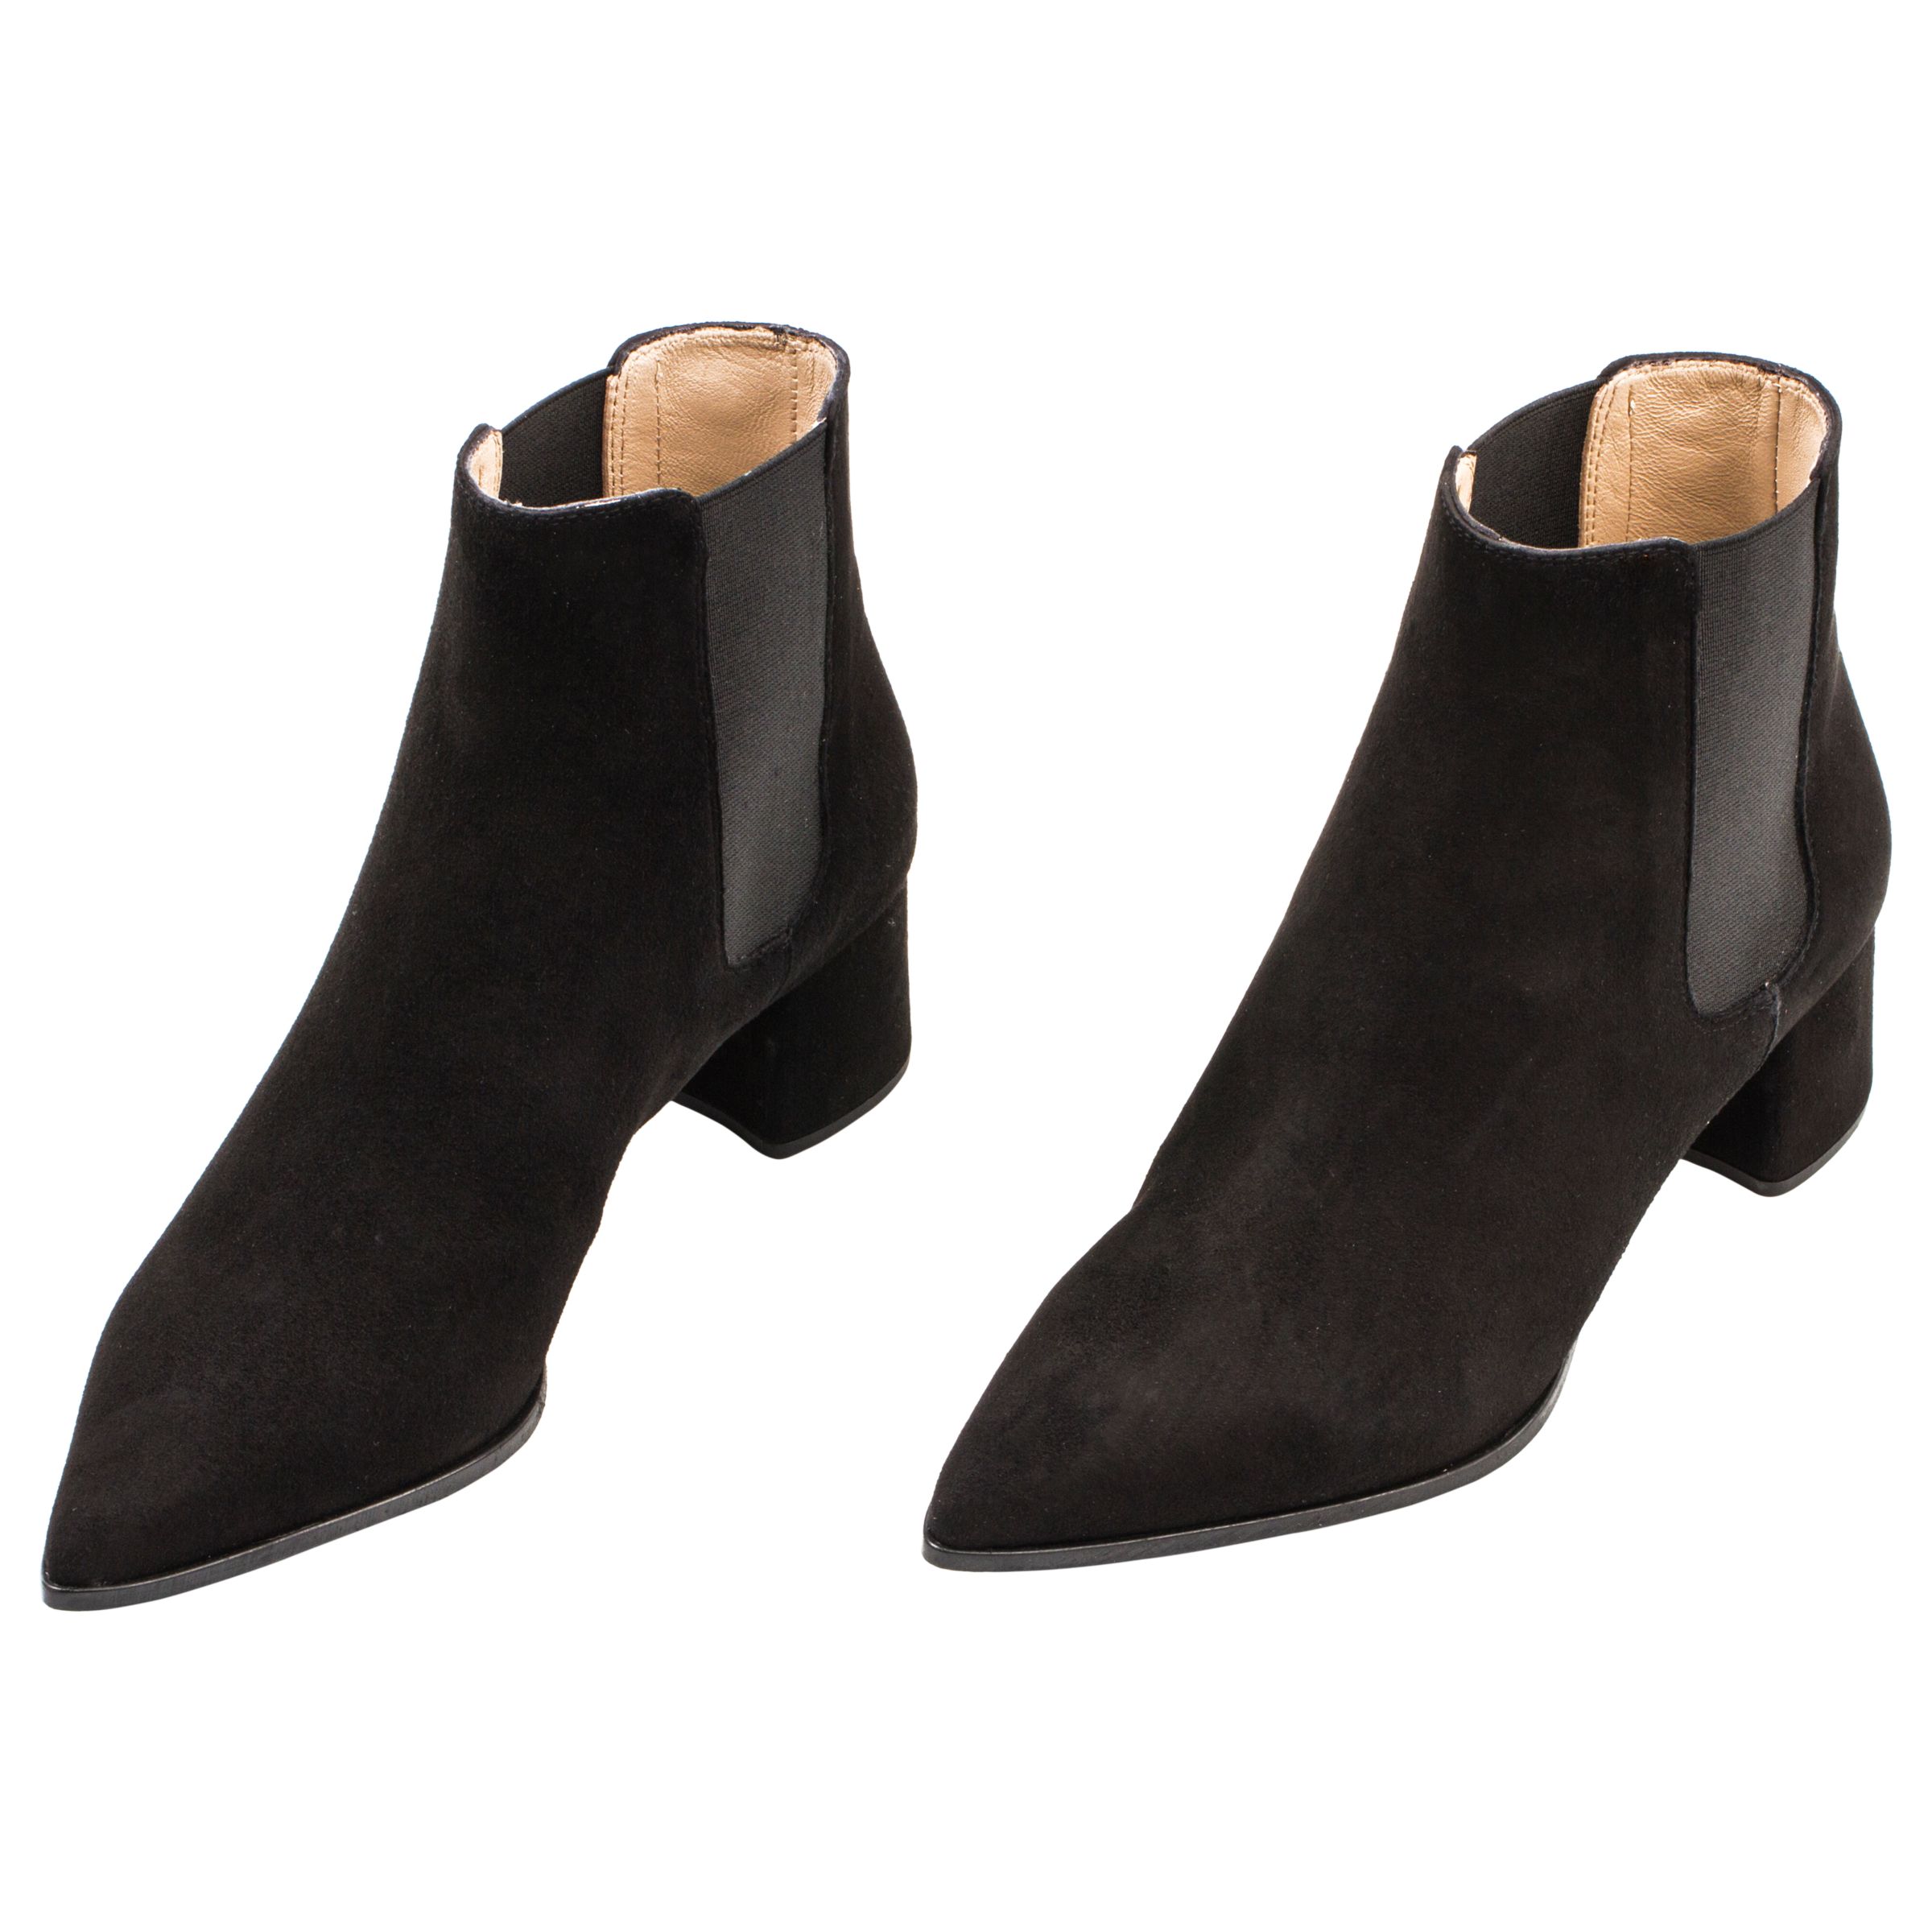 pointed black ankle boots